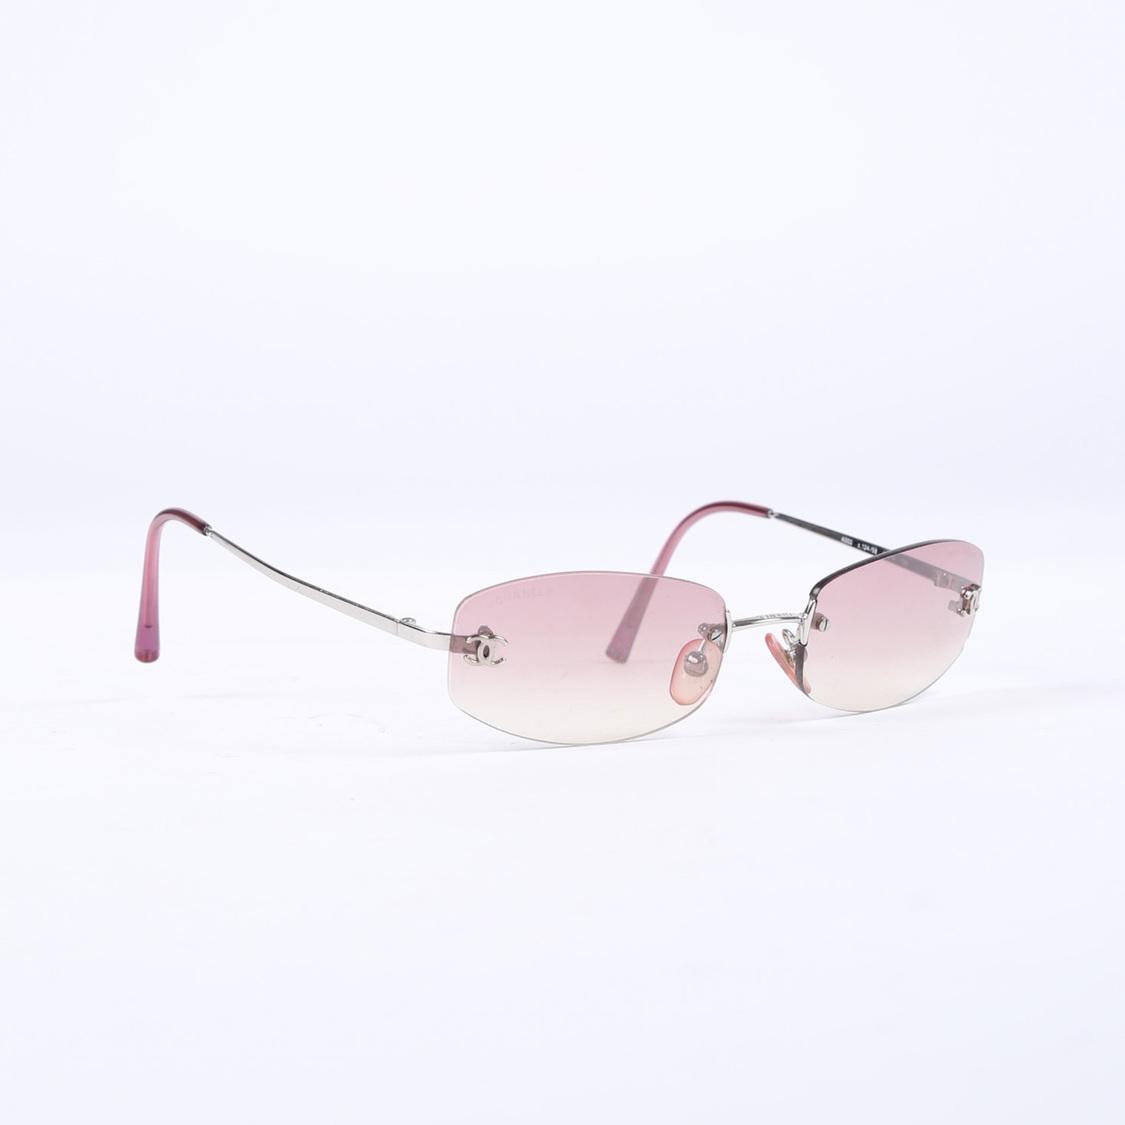 Chanel Rimless Cc Sunglasses in Pink - Lyst